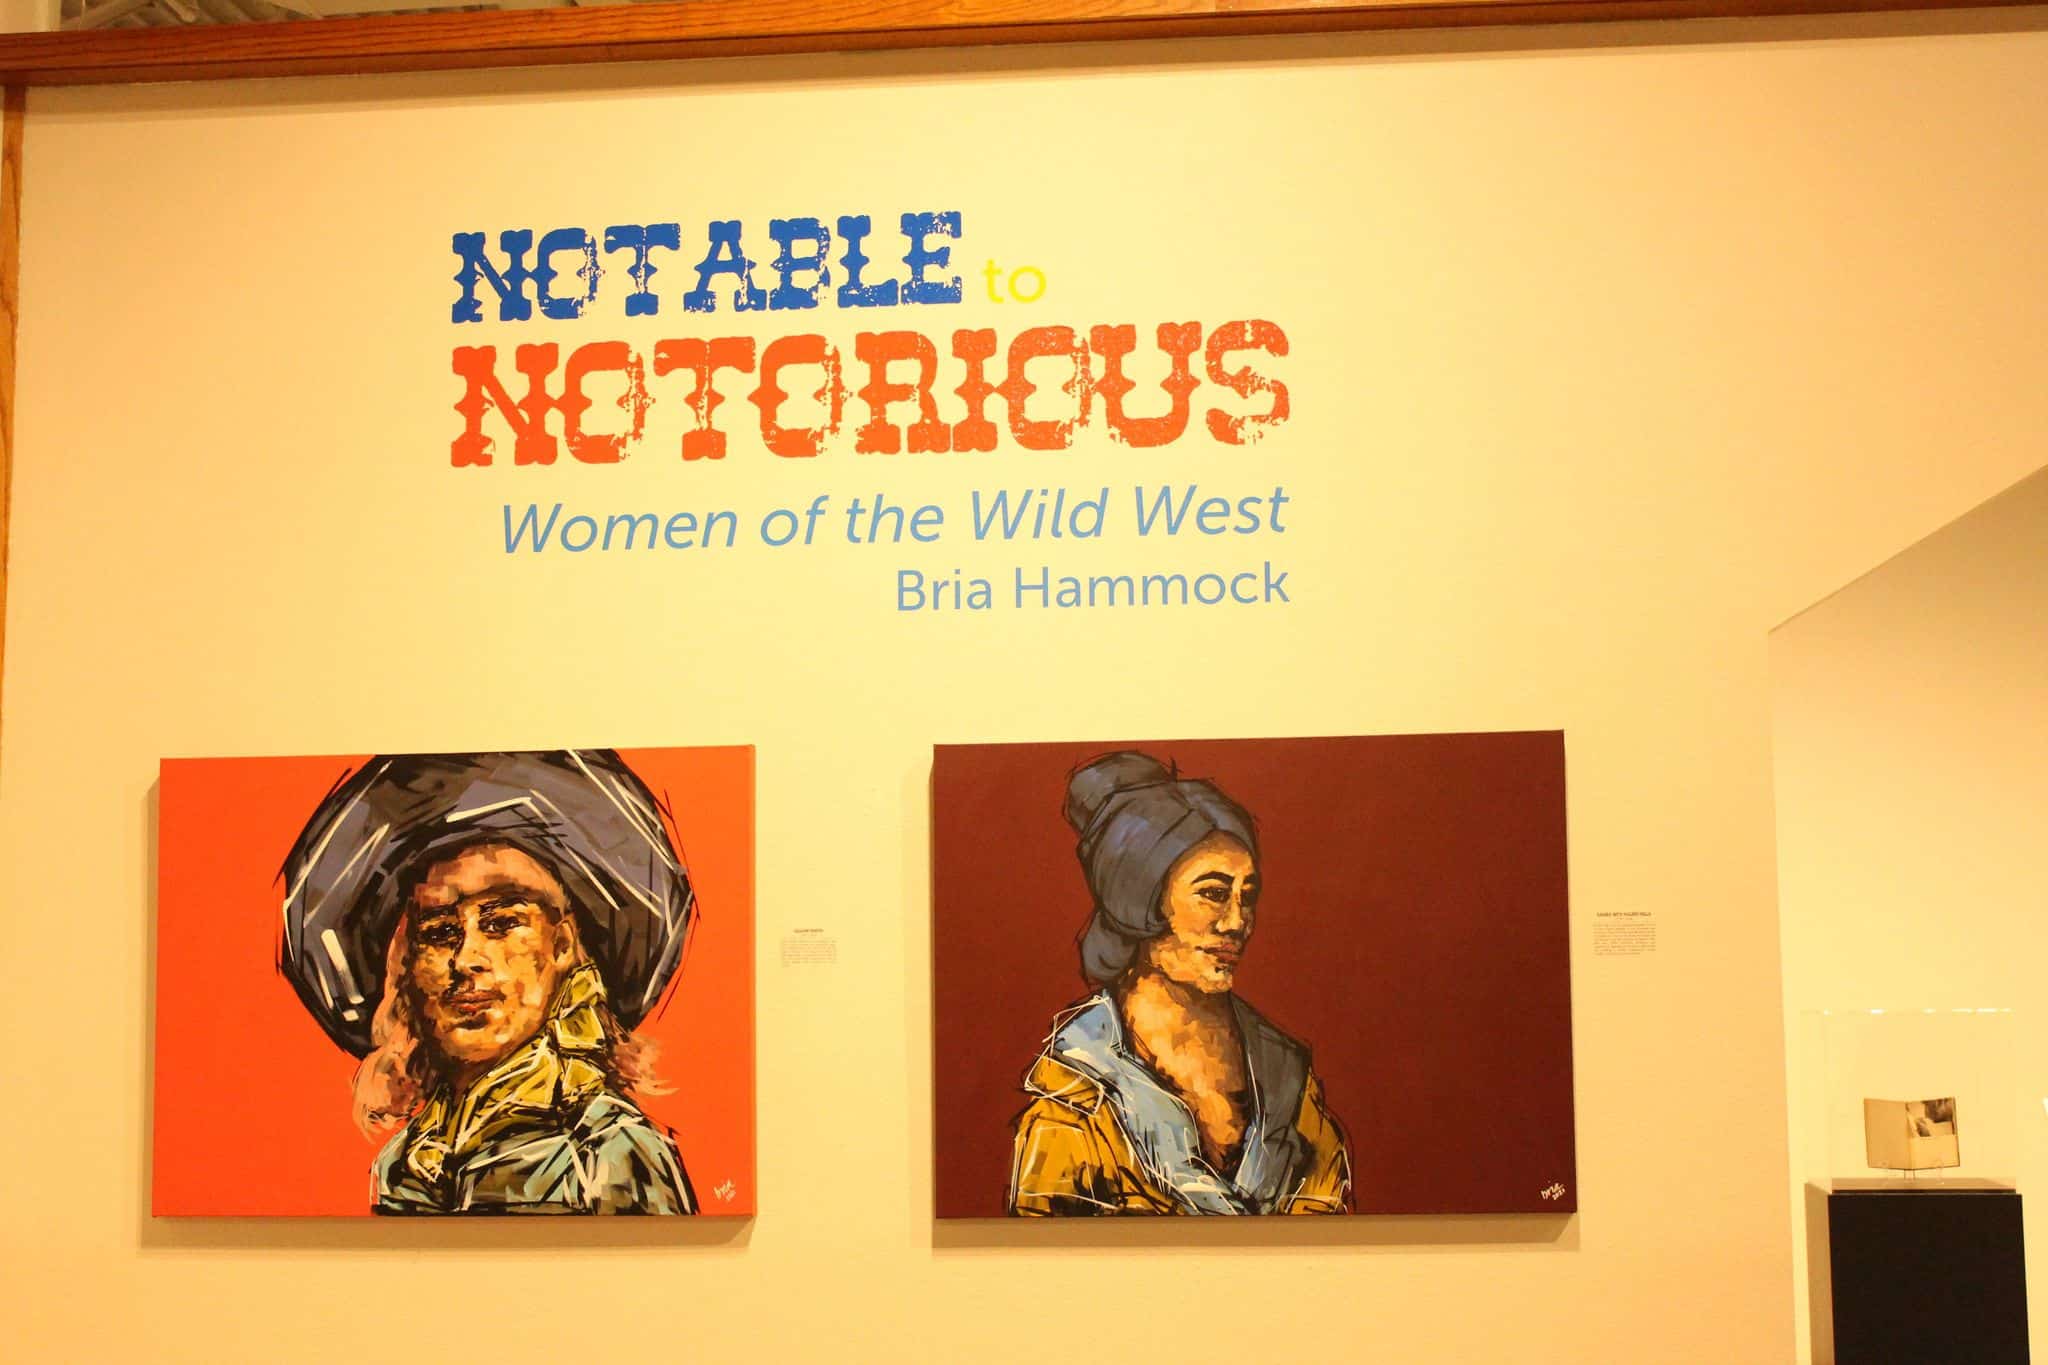 Women of the Wild West at the Nicolaysen Museum